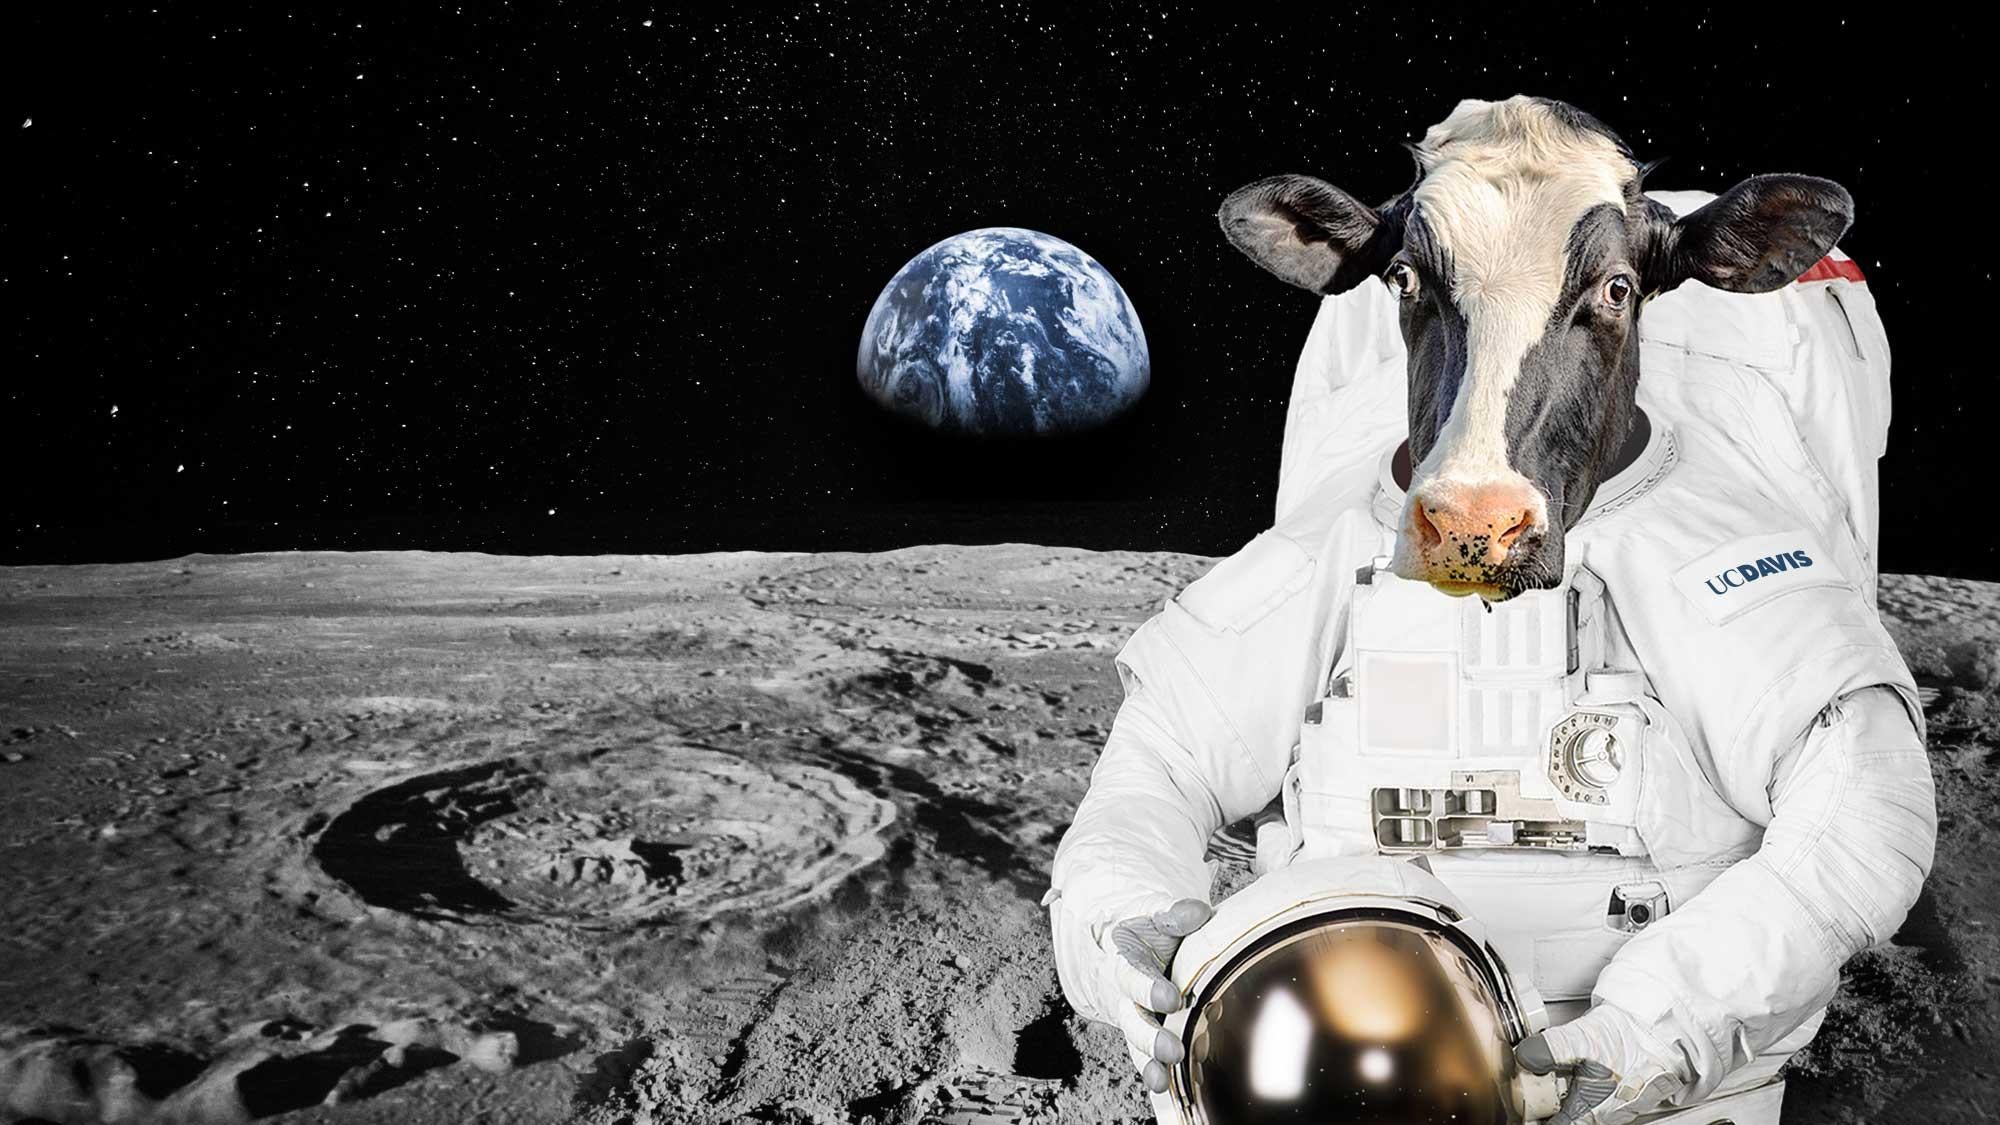 A photo illustration of a cow in a spacesuit on the moon with the earth in the background